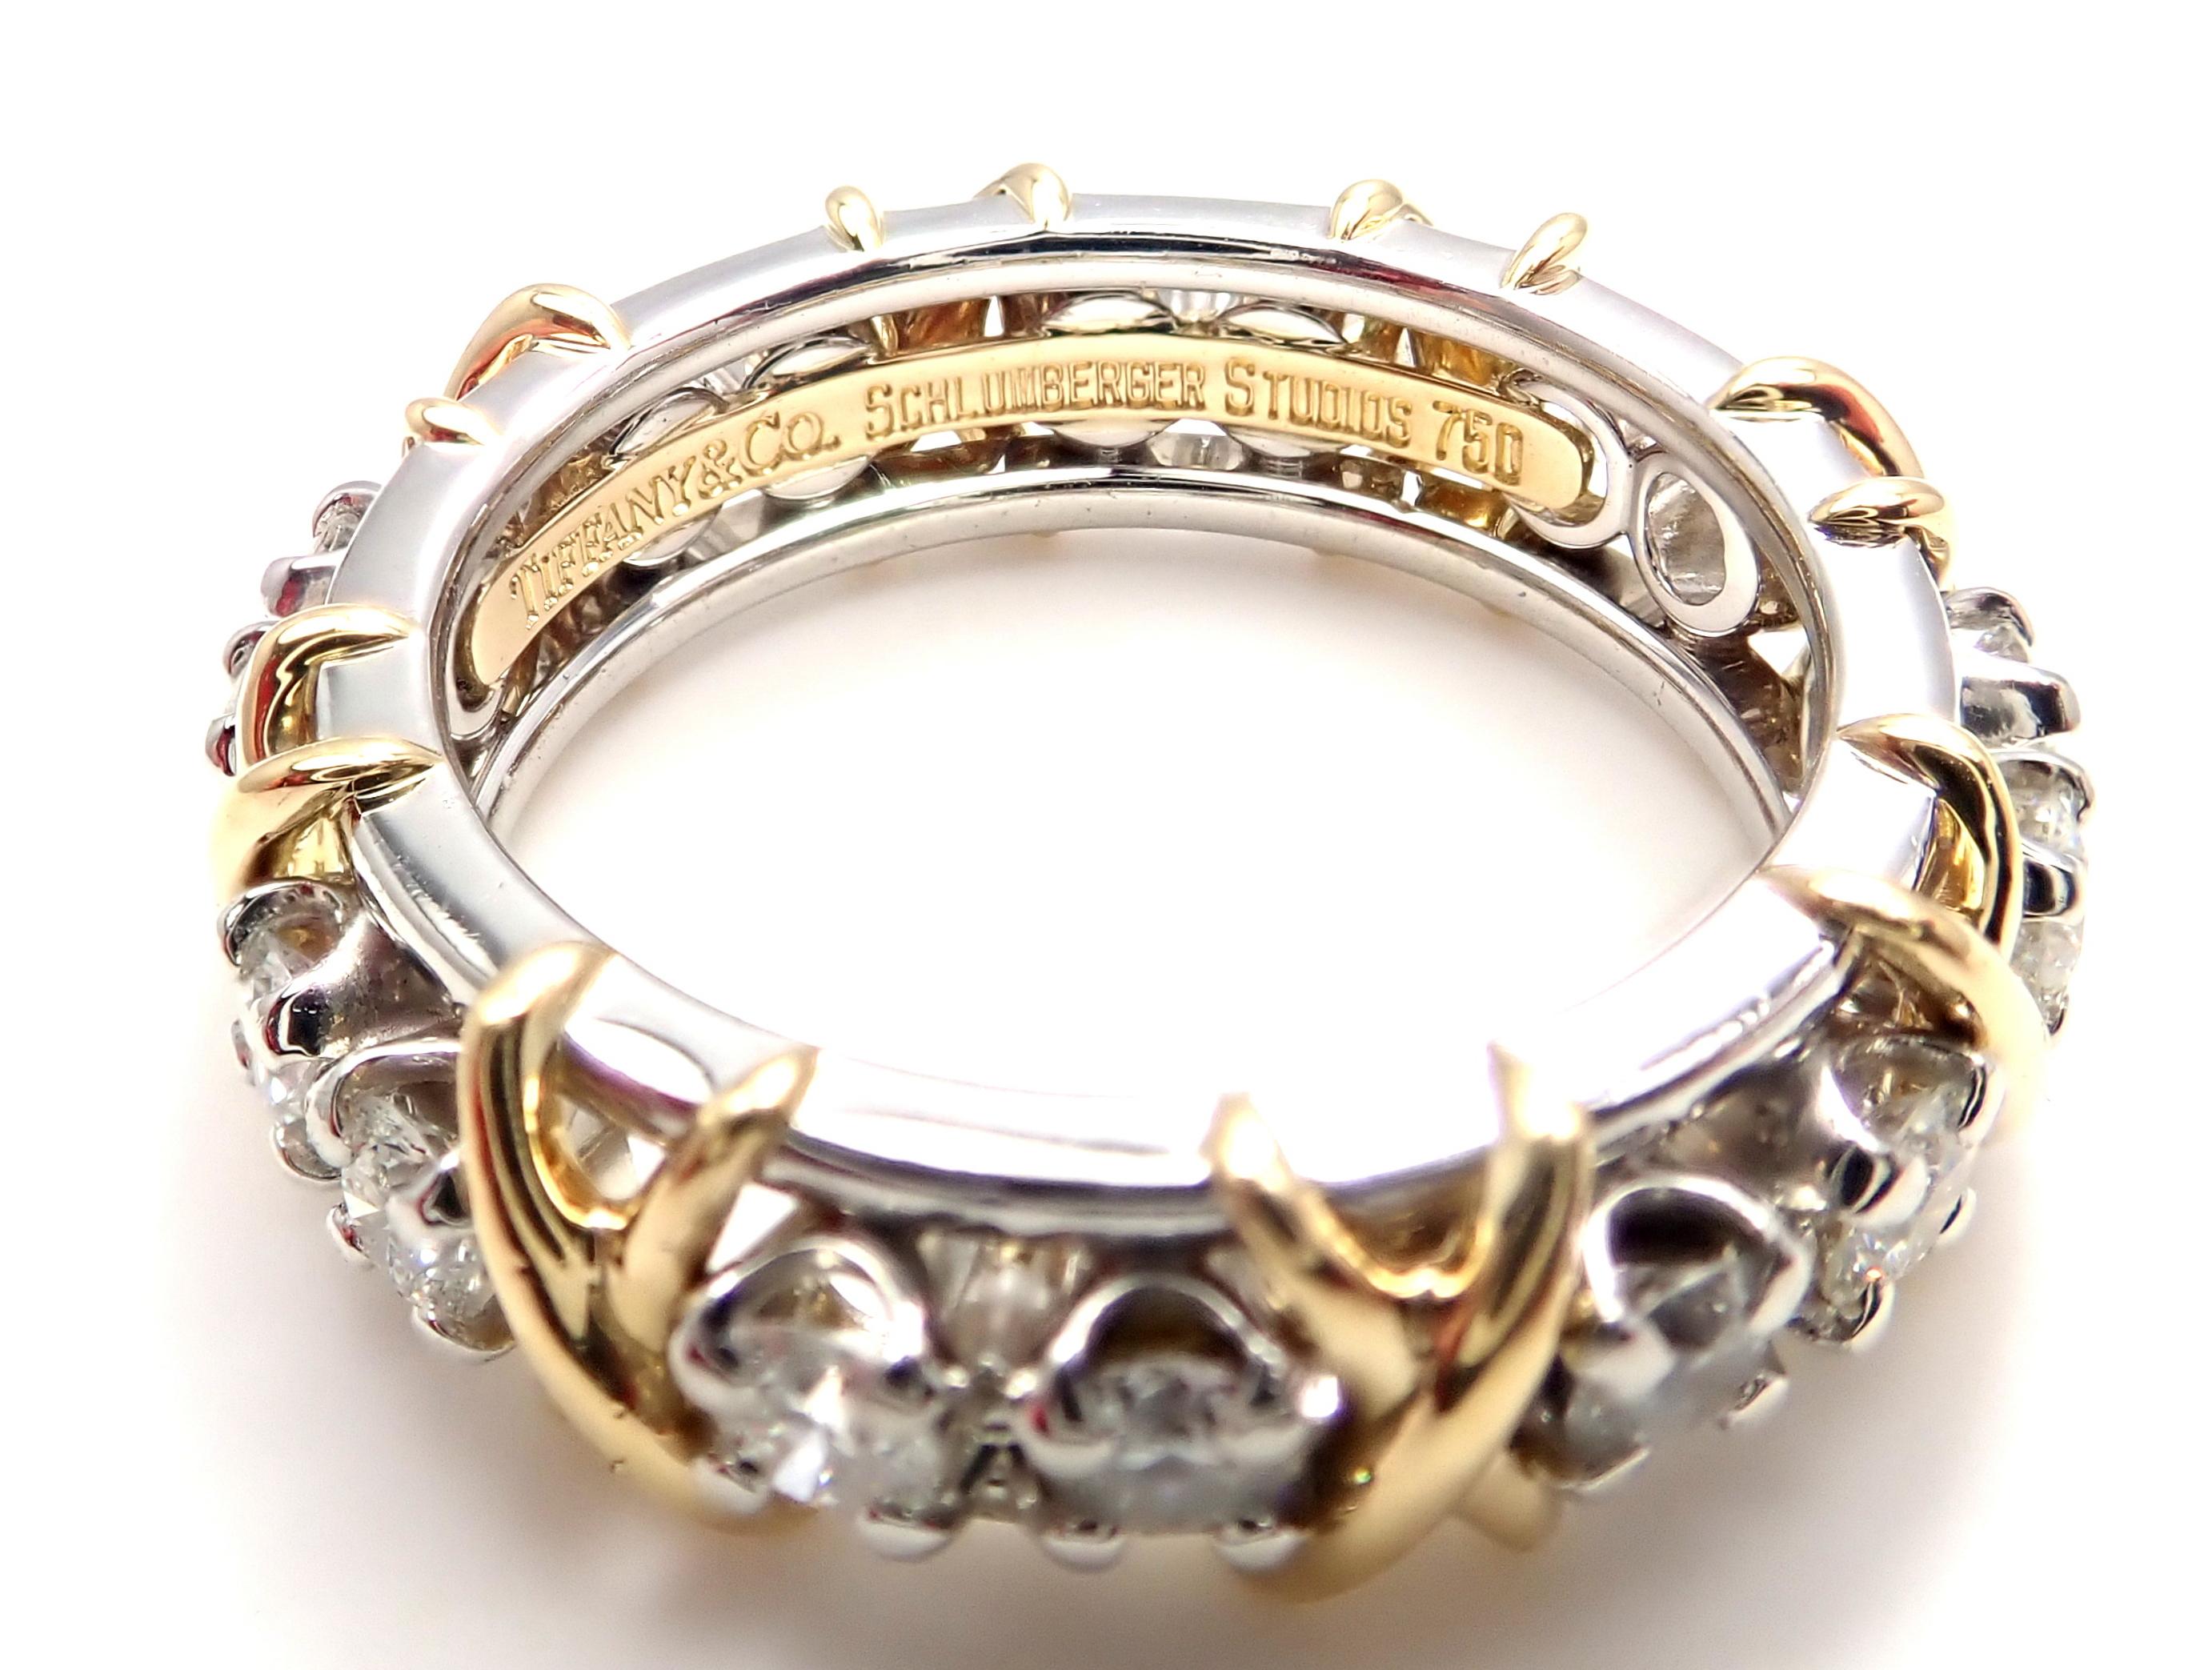 18k Yellow Gold & Platinum Diamond Jean Schlumberger Band Ring designed for Tiffany & Co. 
With 16 Round Brilliant Cut Diamonds VS1 clarity, G color, Total weight Approx 1.14ct
This ring comes with Tiffany & Co box.
Details:
Ring Size: 7
Weight: